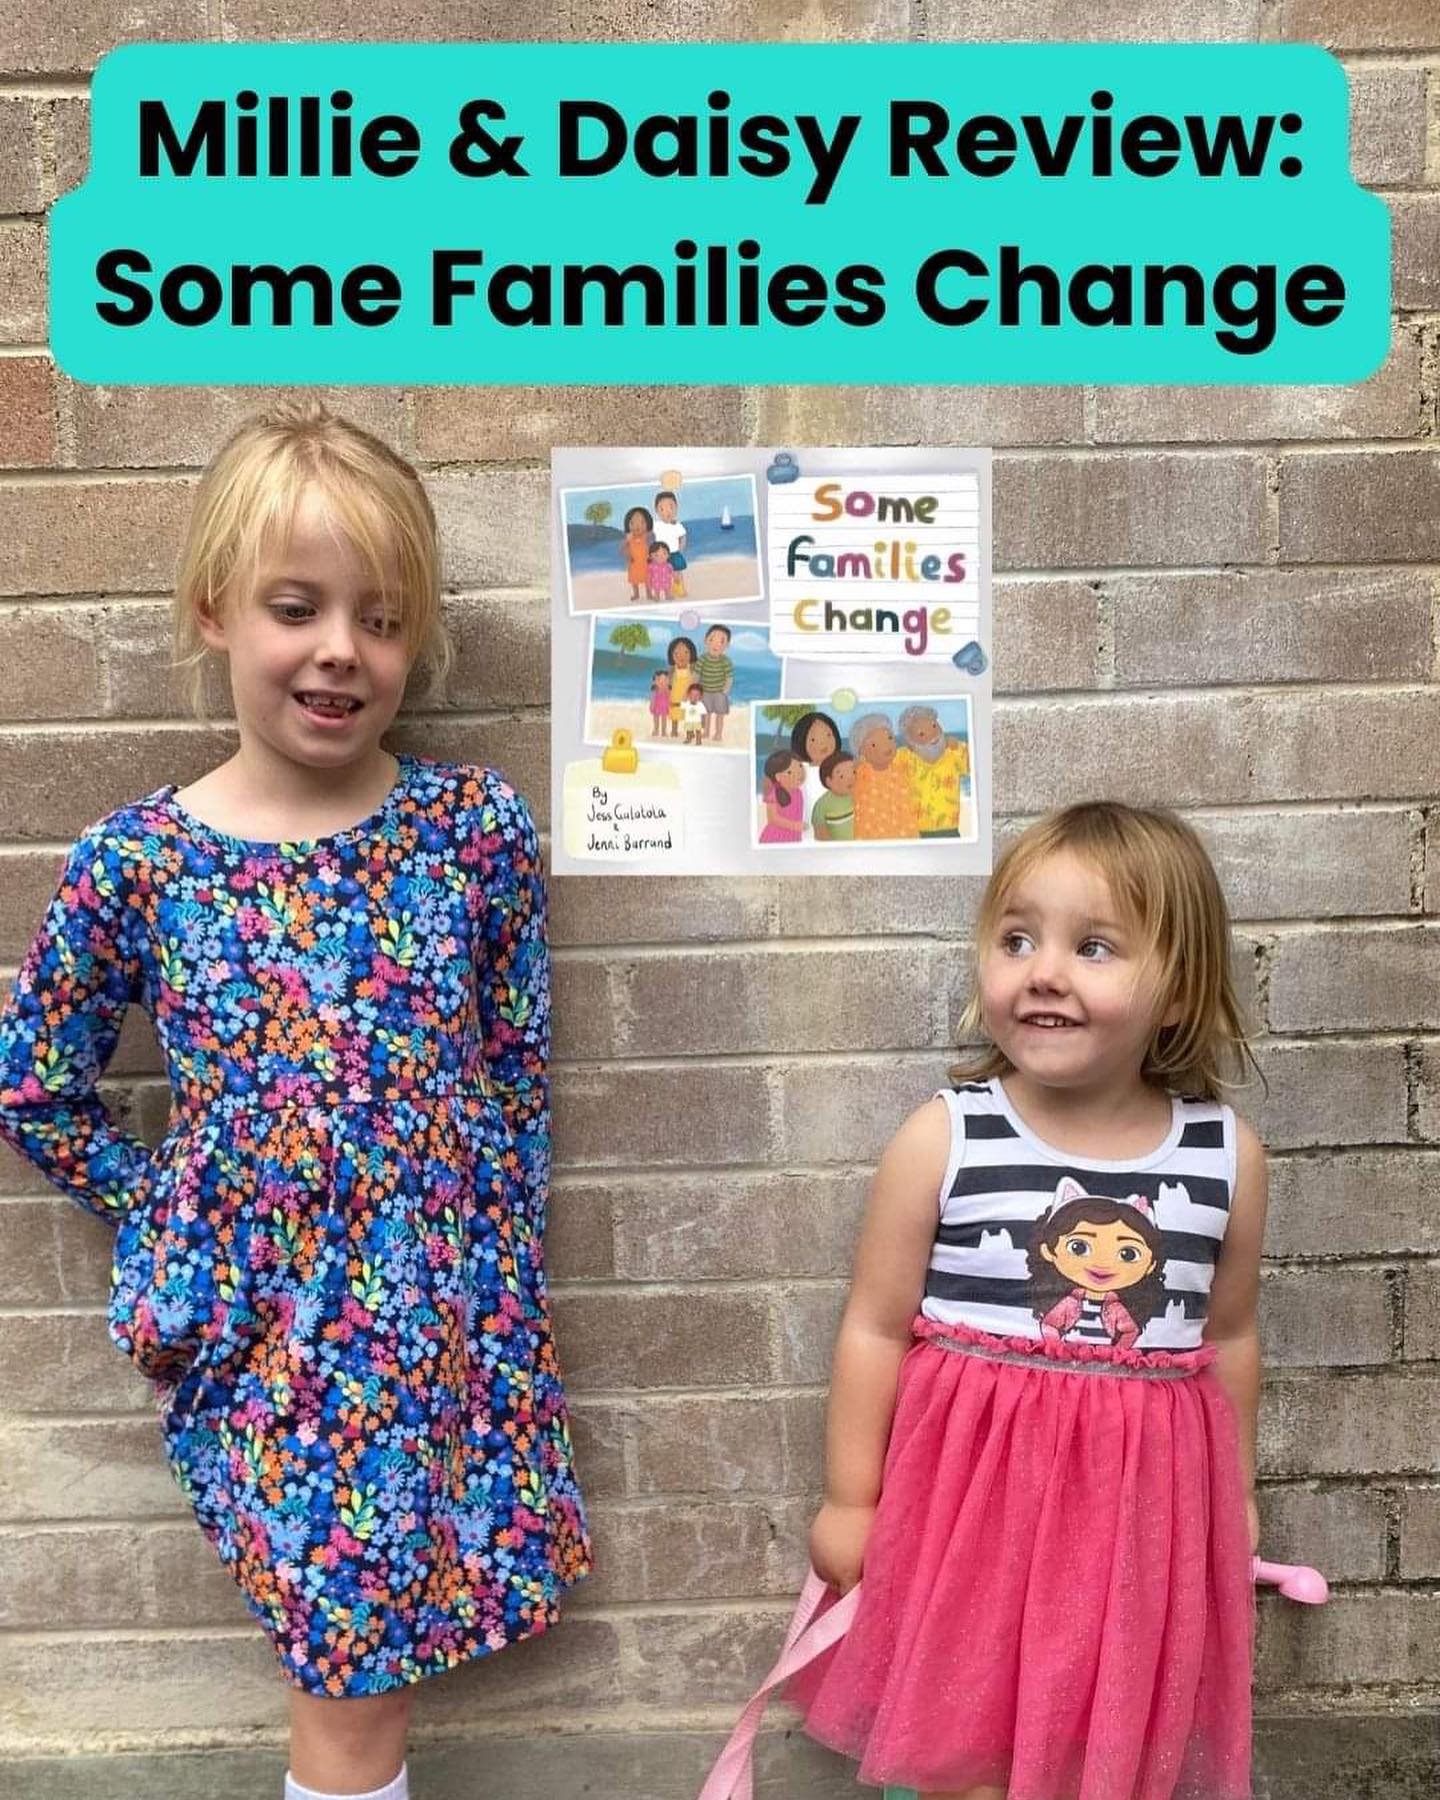 📚Millie &amp; Daisy review Some Families Change by @jess.galatola illustrated by @illustration_jennibarrand, published @ekbooksforkids🌳

A stunning, and important, debut book by Jess and Jenni that gets you smack in the heart 💘 

Jess tenderly nav